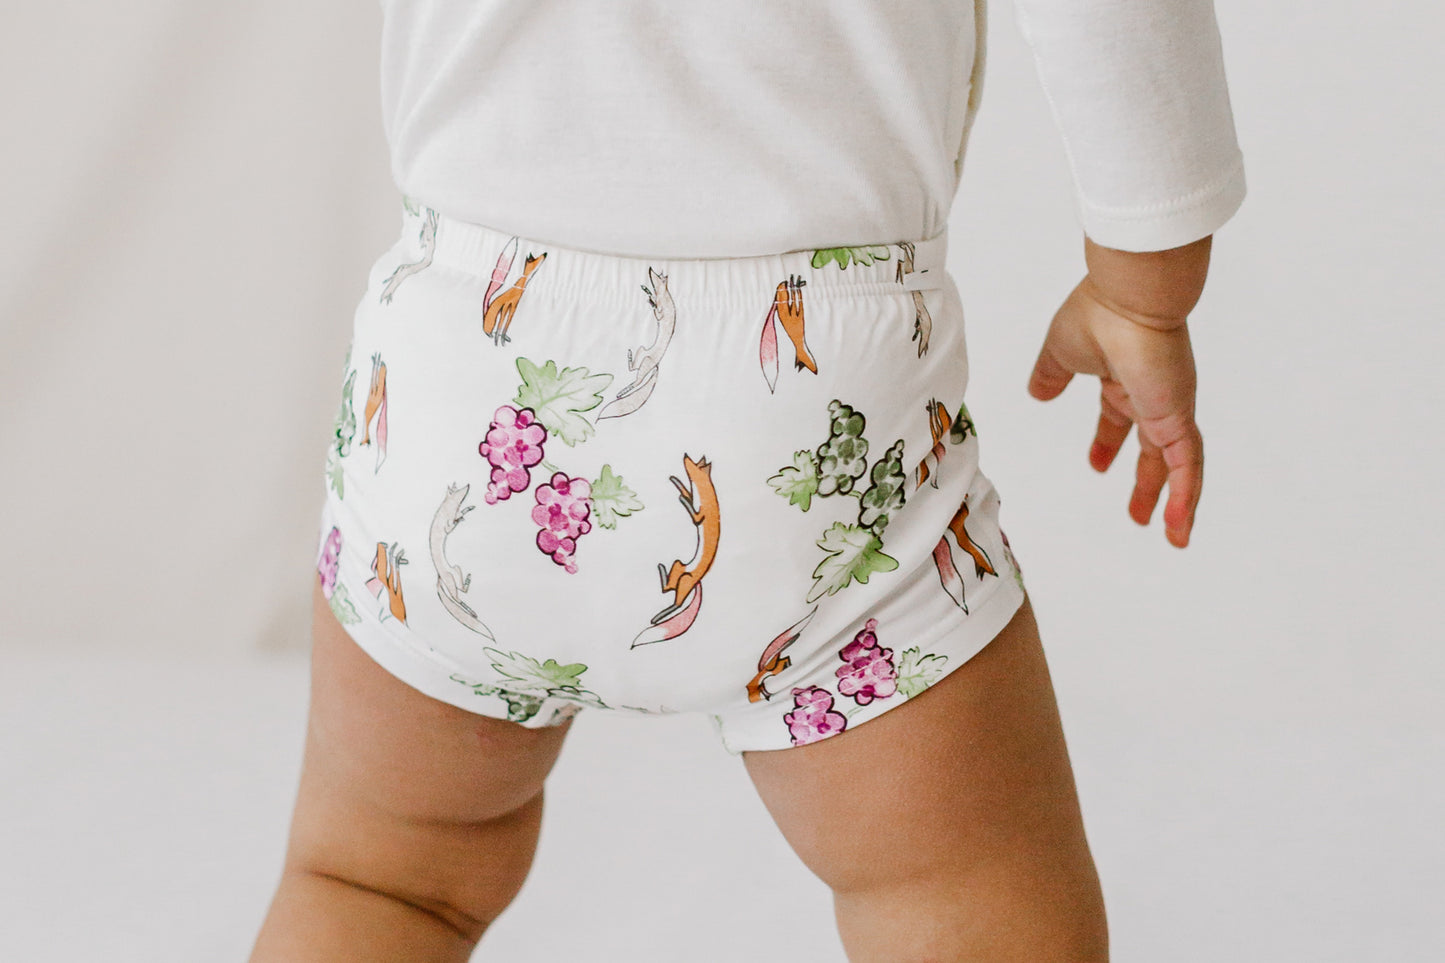 Girls Boy Short Underwear (Bamboo, 2 Pack) - The Mouse & The Fox